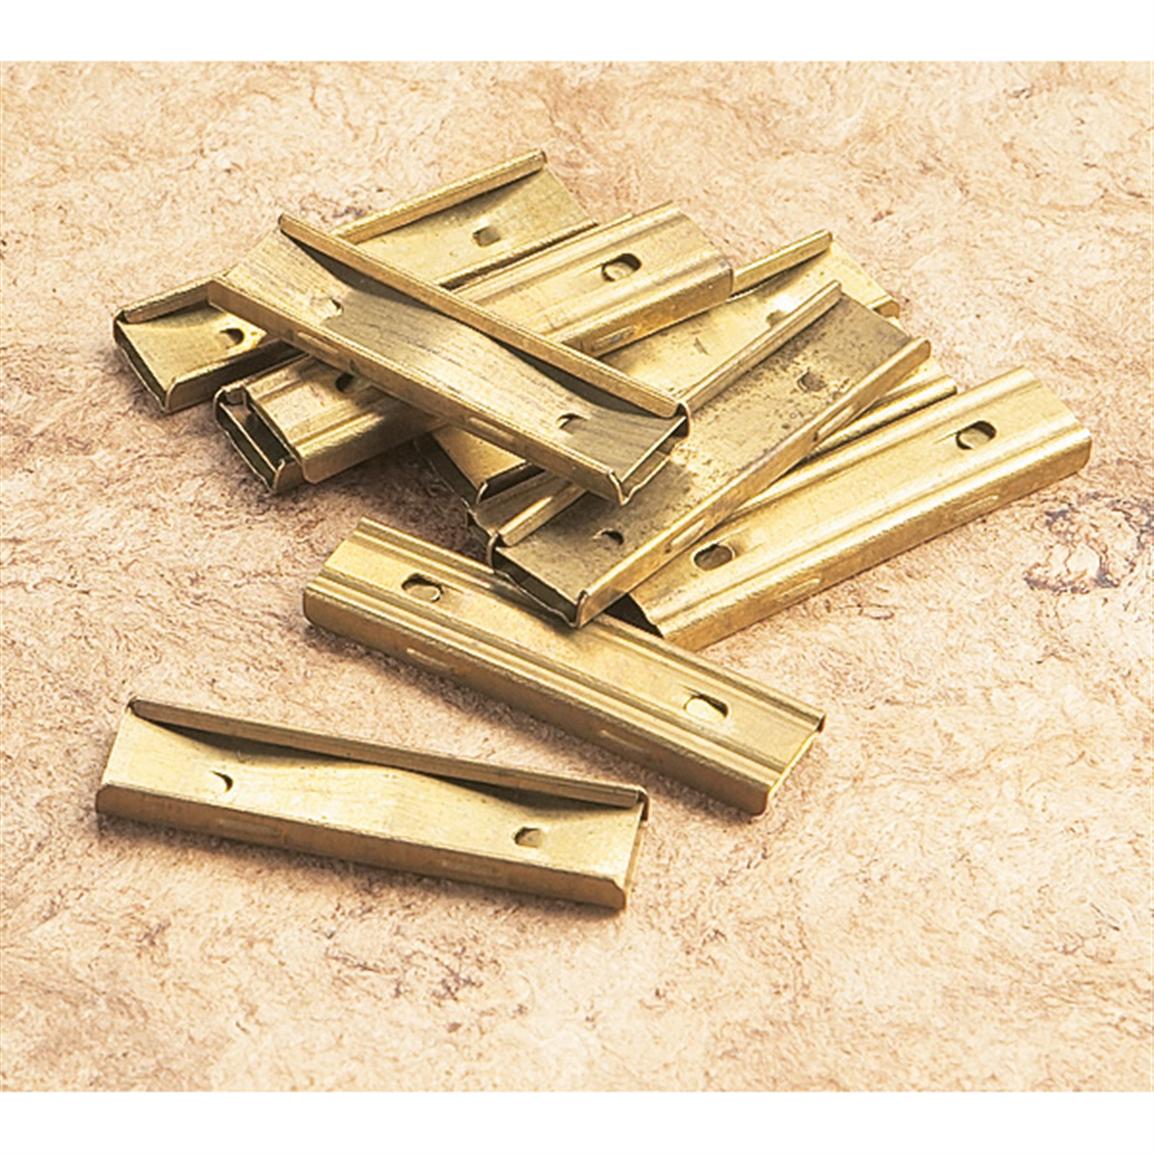 Authentic Russian Stripper clips packs For SKS, 7.62x39 5 